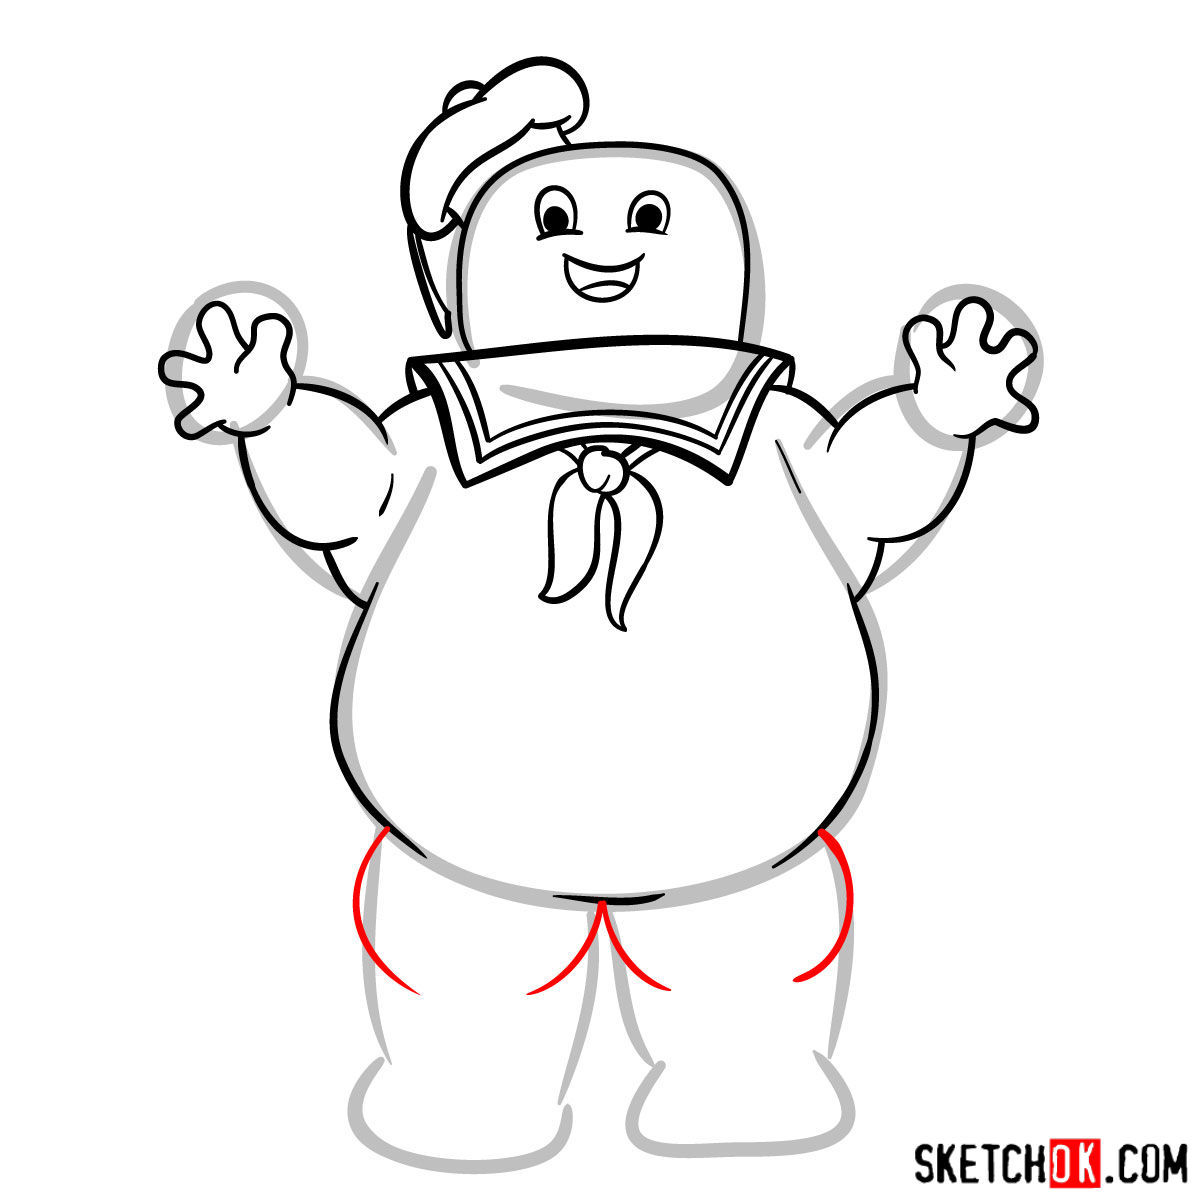 How to draw Stay Puft Marshmallow Man - step 08